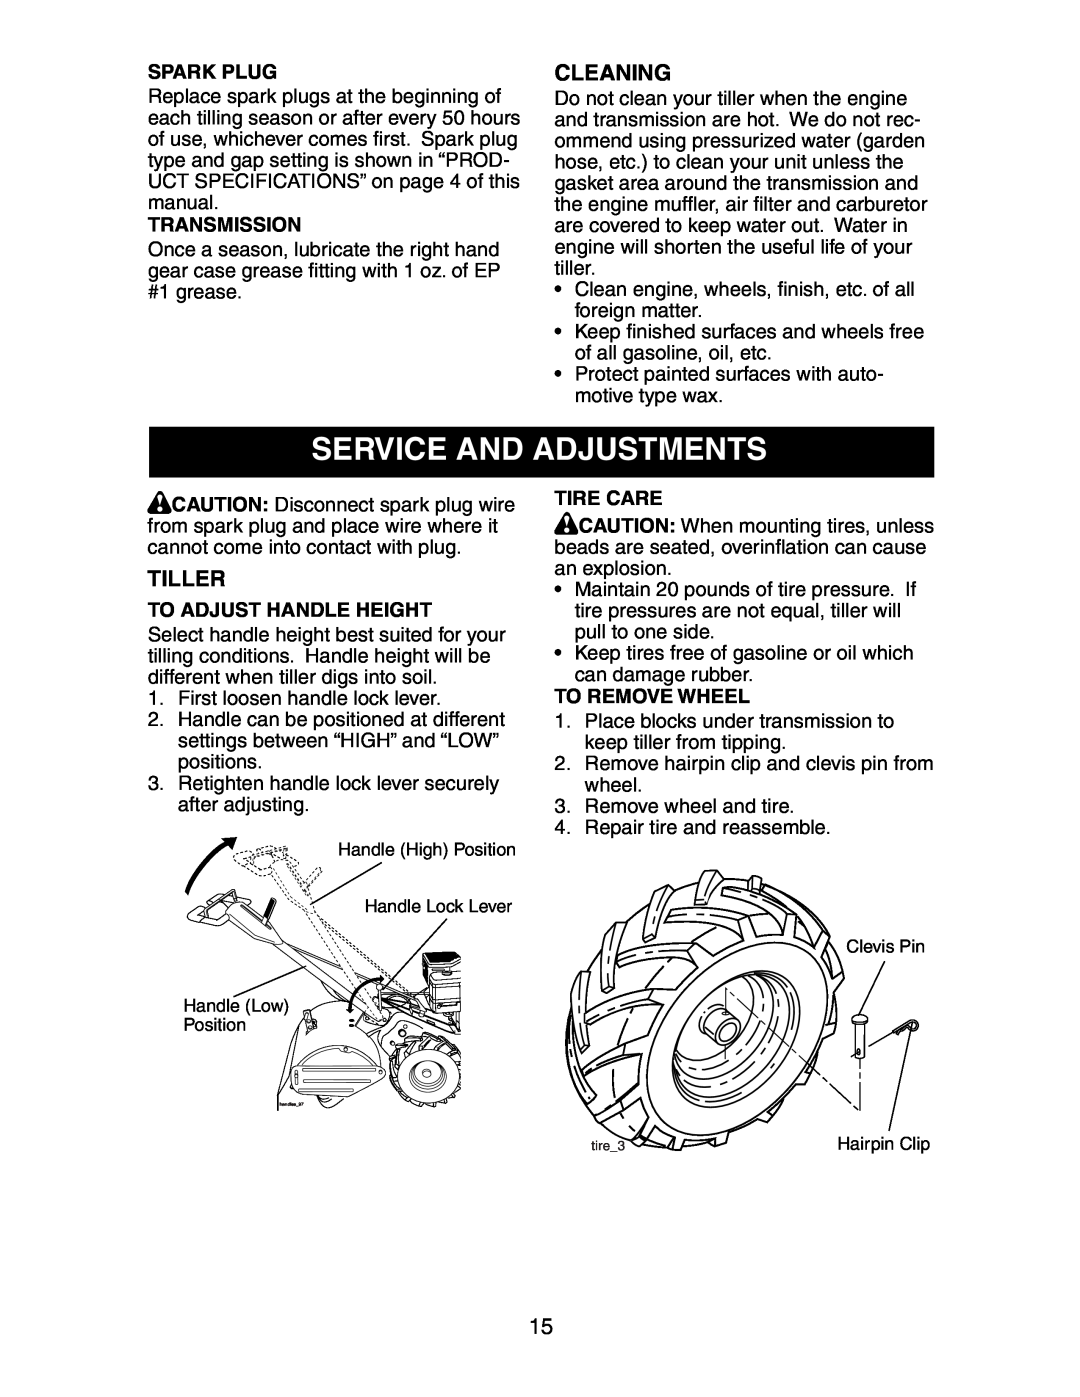 Sears 917.29425 Service And Adjustments, Cleaning, Tiller, Spark Plug, Transmission, To Adjust Handle Height, Tire Care 